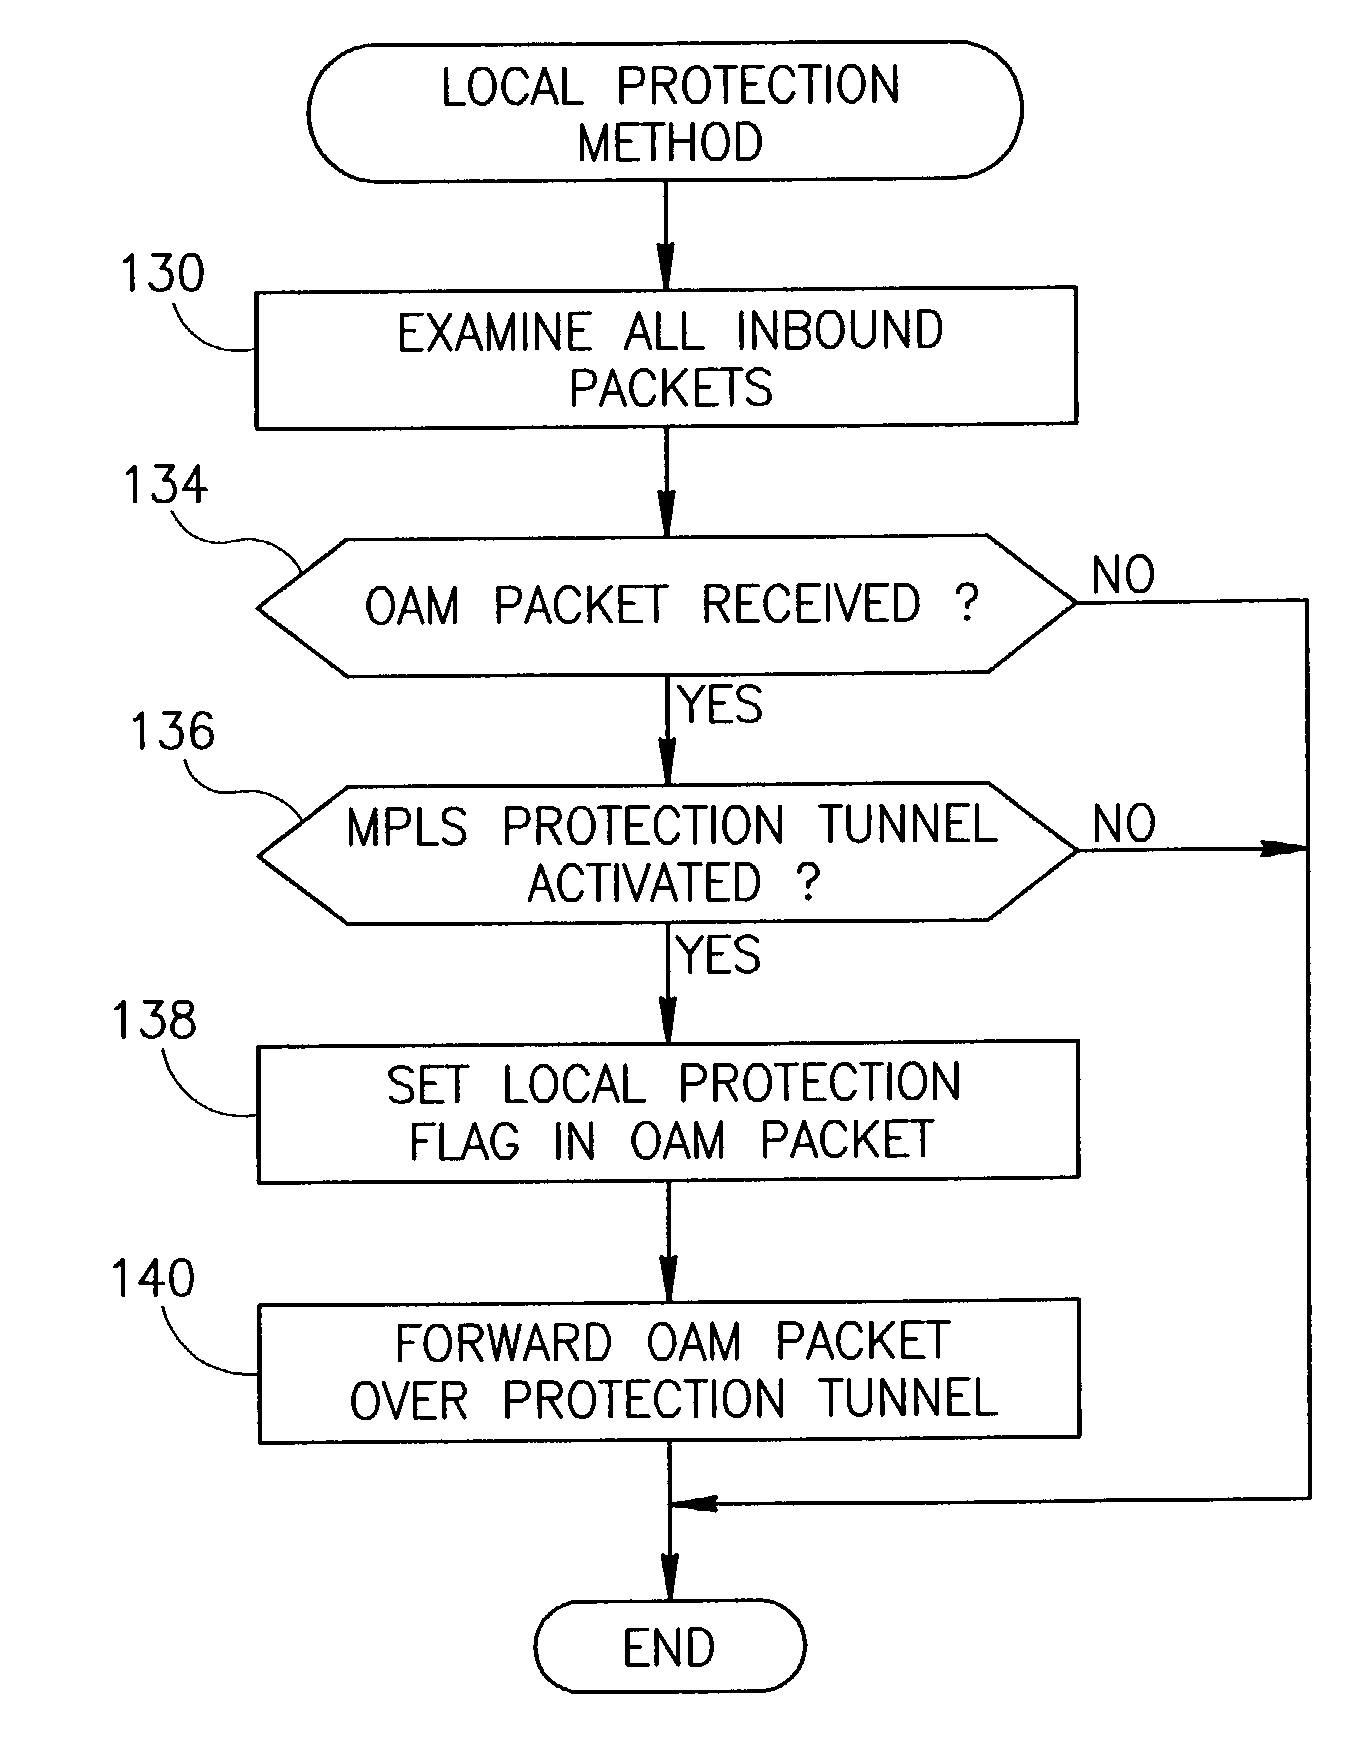 End-to-end notification of local protection using OAM protocol